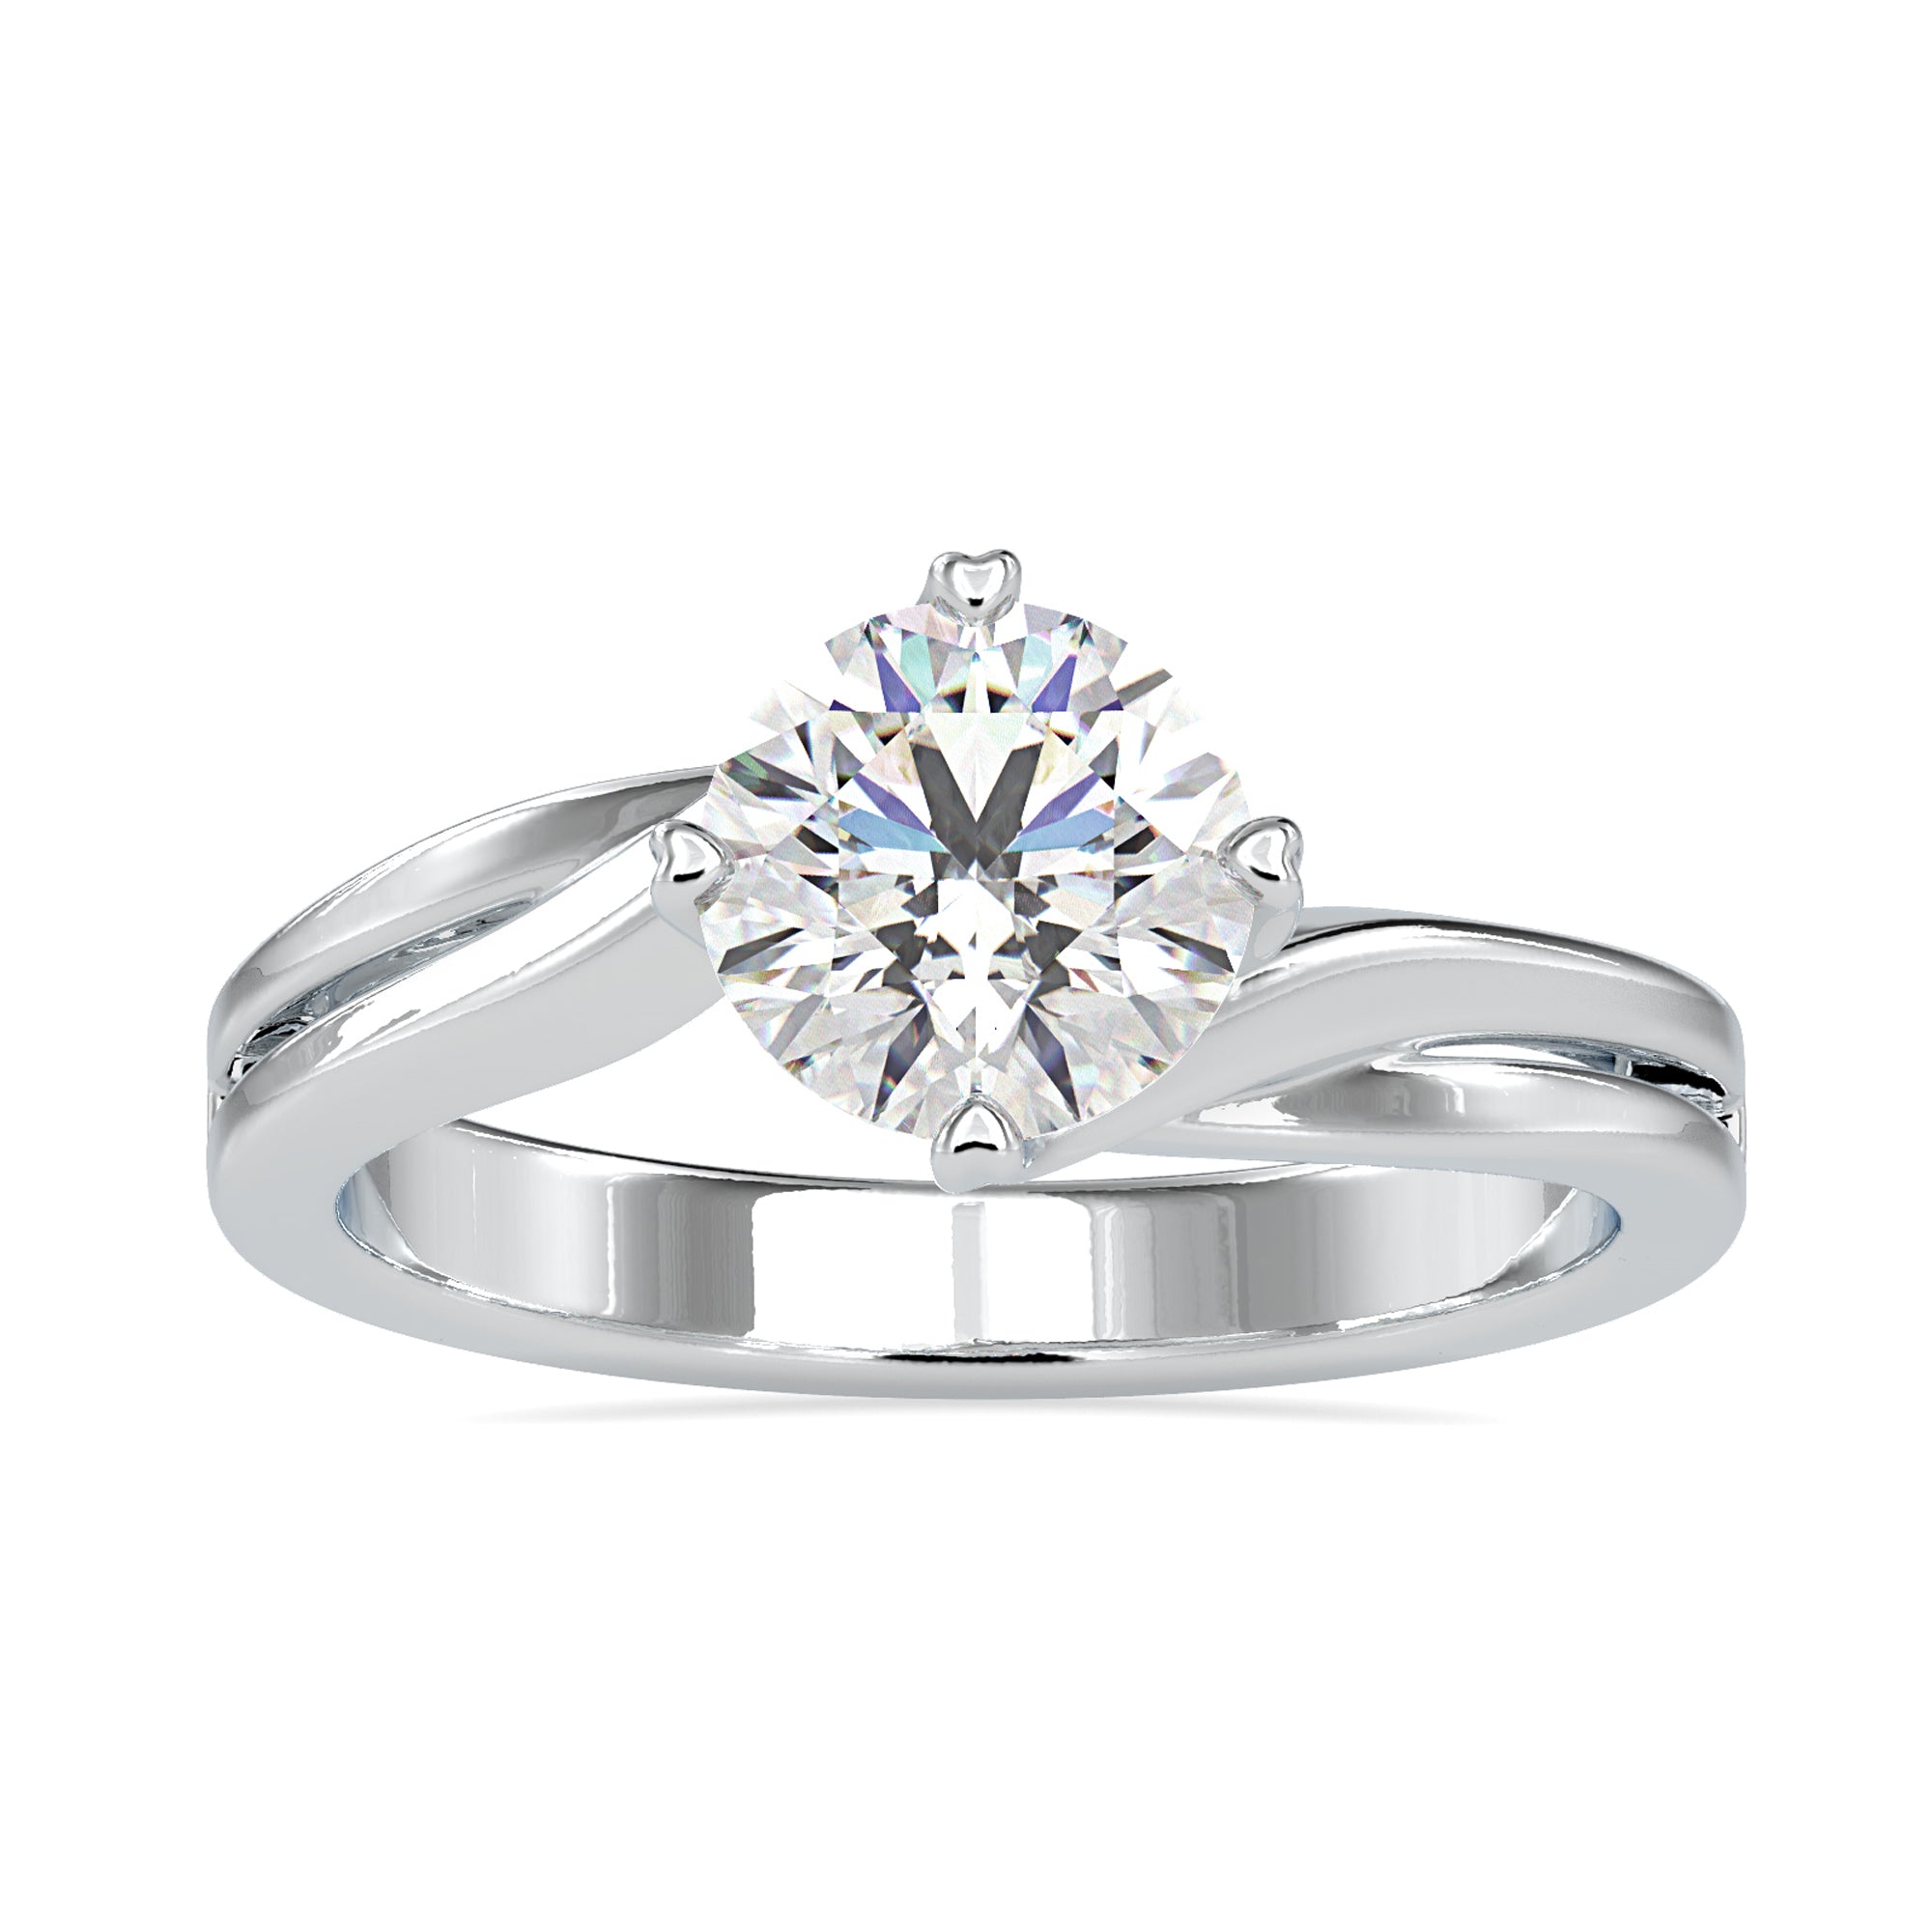 Heart Prongs 1.19 TW Round Cut Twisted Shank Moissanite Solitaire Ring